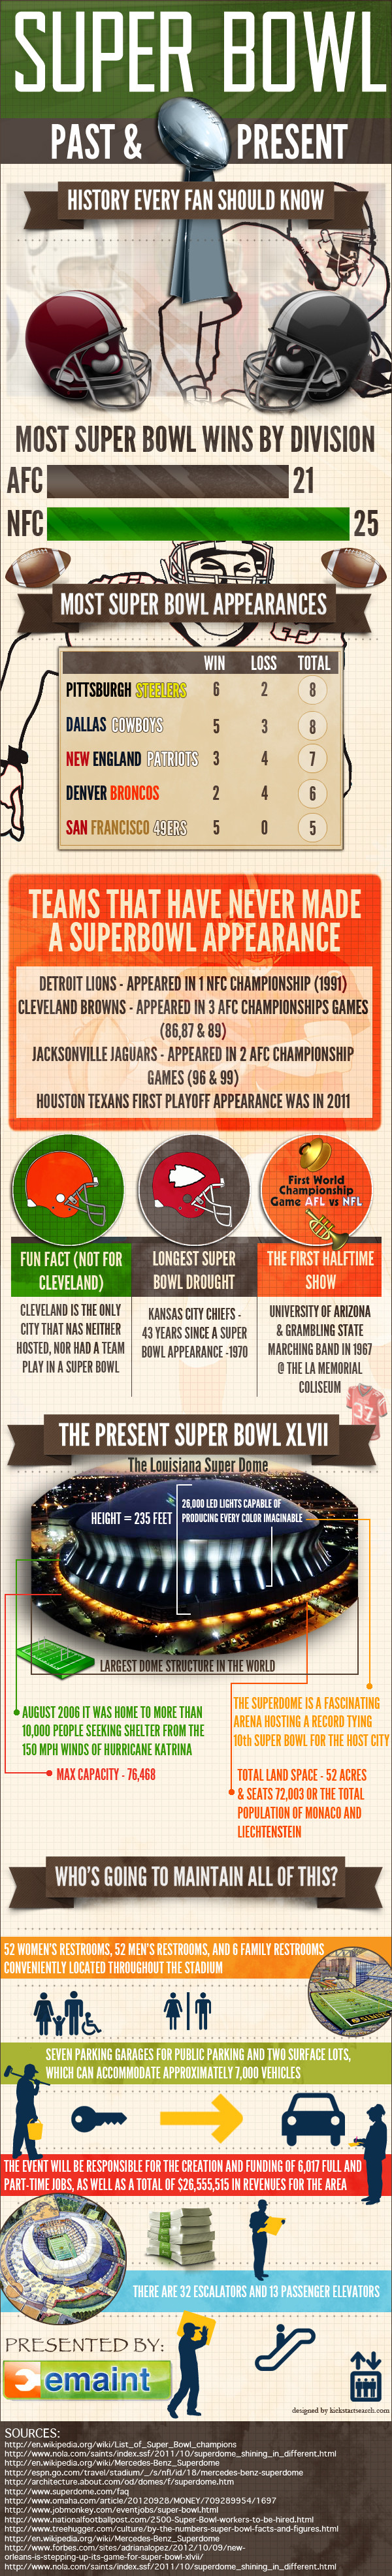 Super Bowl past and present historical facts infographic